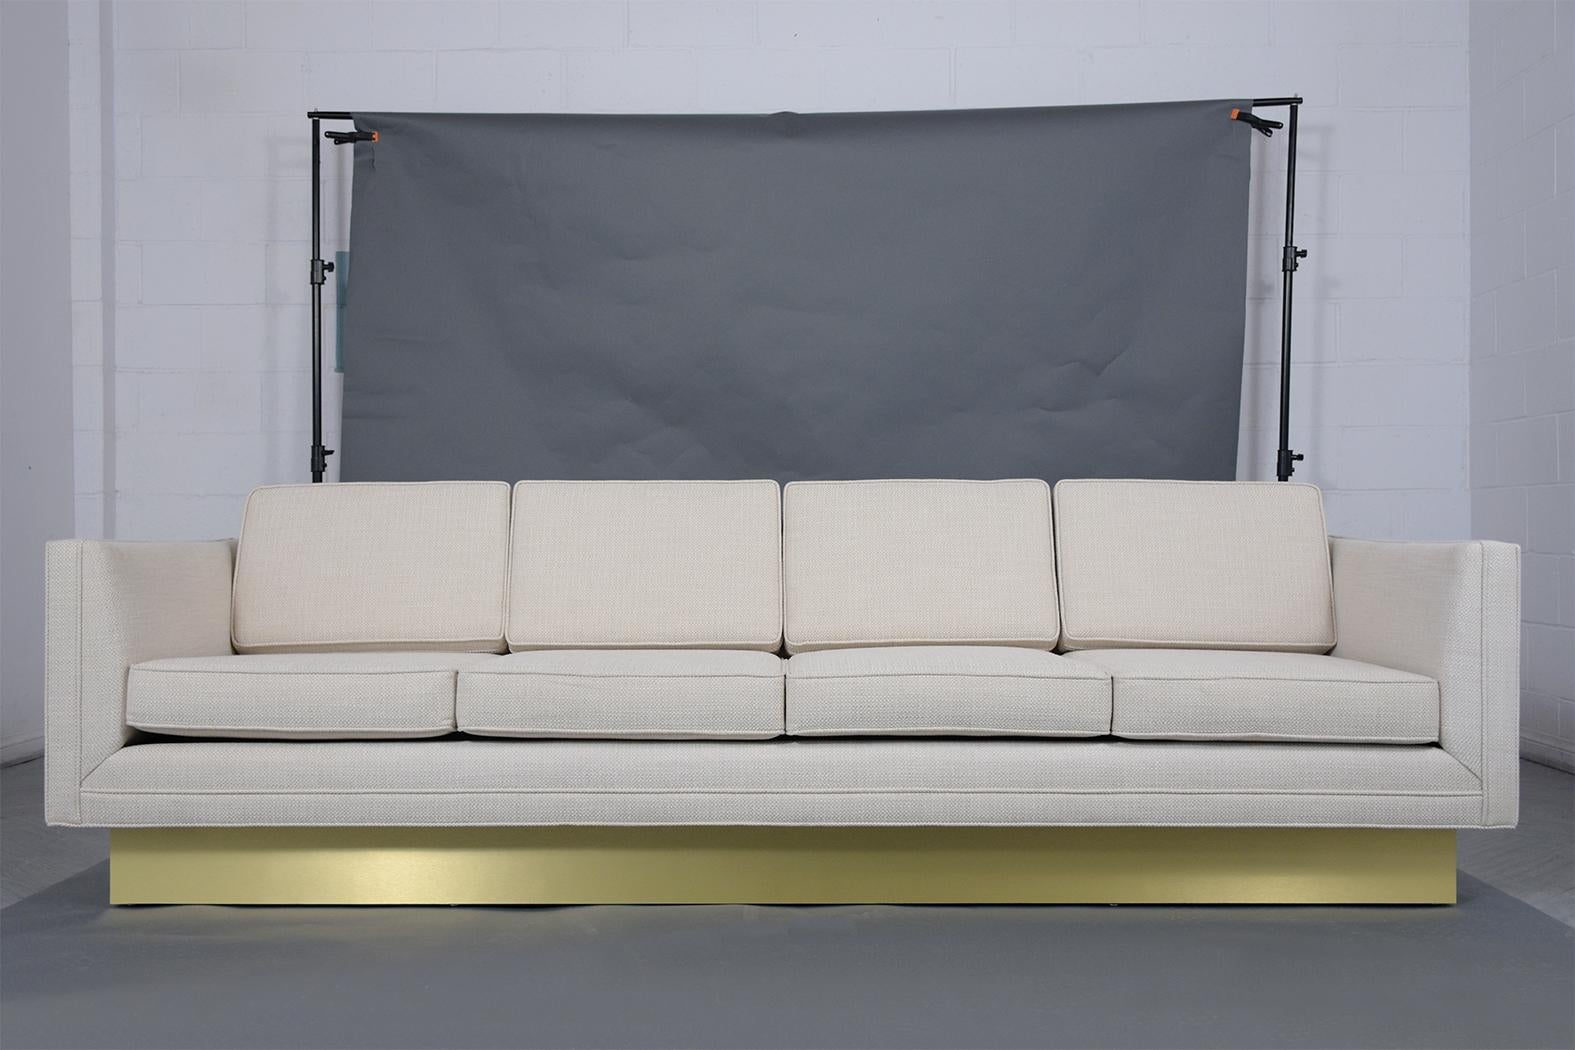 Dive into the essence of mid-century modern perfection with our beautifully restored vintage executive sofa. Constructed from solid wood and reupholstered in an elegant off-white fabric, this tuxedo-style sofa exudes timeless appeal and luxury,